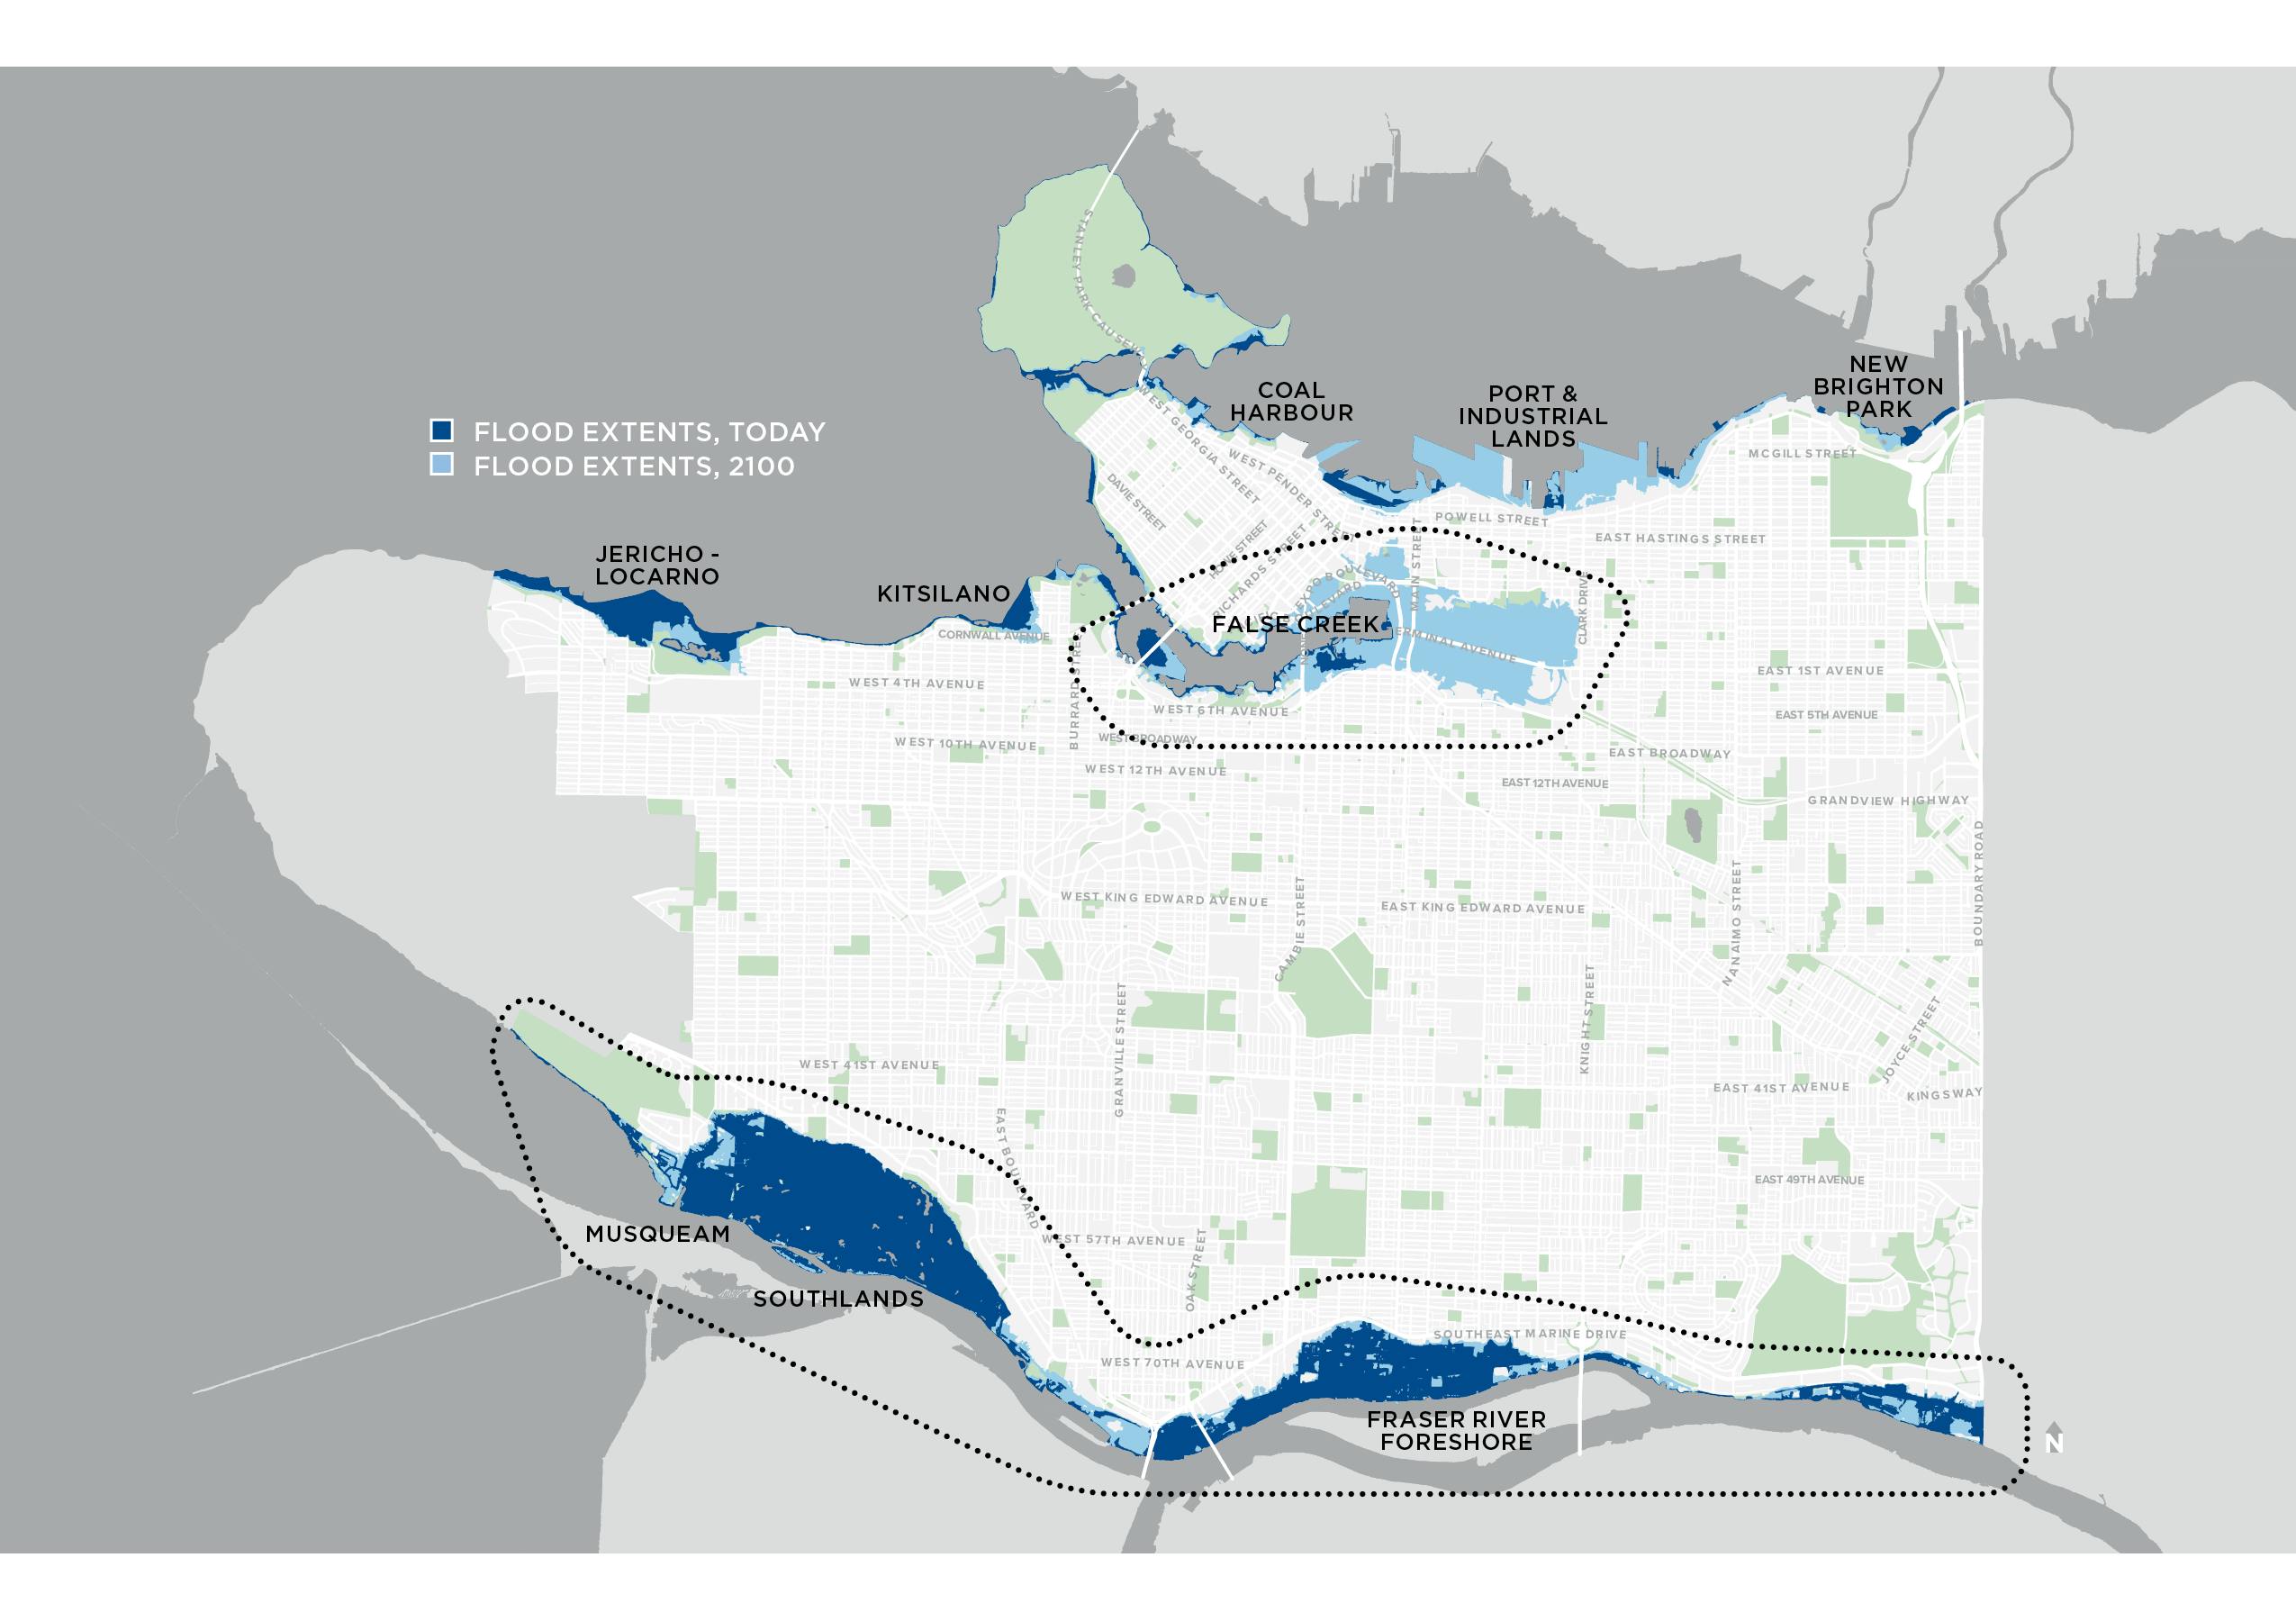 Vancouver’s coastal floodplain today and in 2100. The dark blue indicates the areas vulnerable to a major storm. The dark and light blue, together, indicate the areas that are vulnerable to a major storm and 1.0 m of sea level rise.